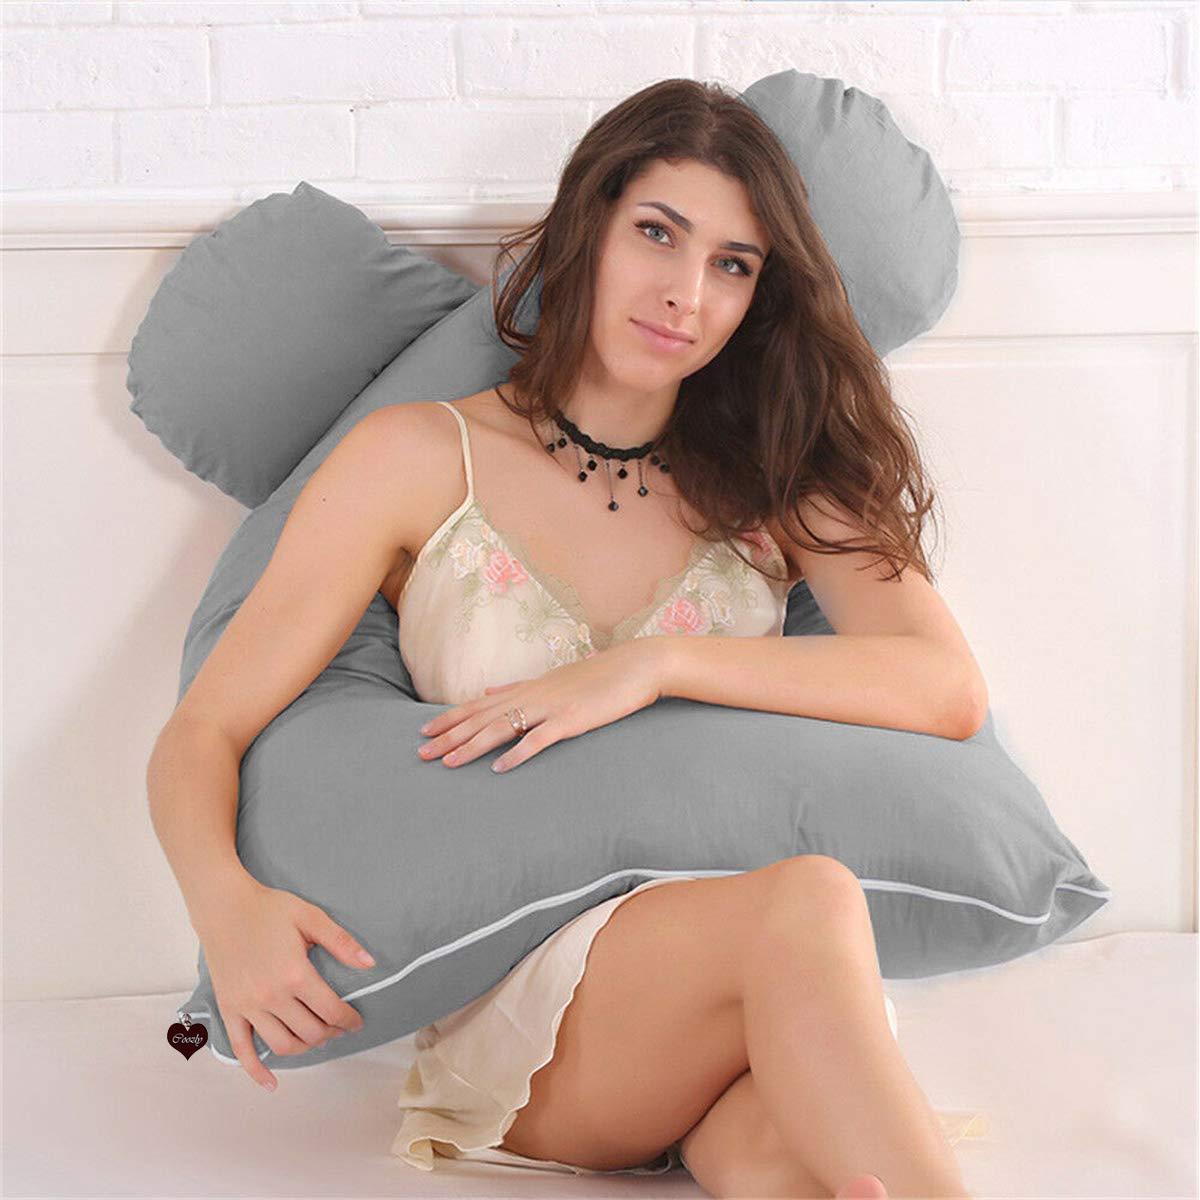 Grey - Coozly Basic Body Contour Pregnancy Pillow